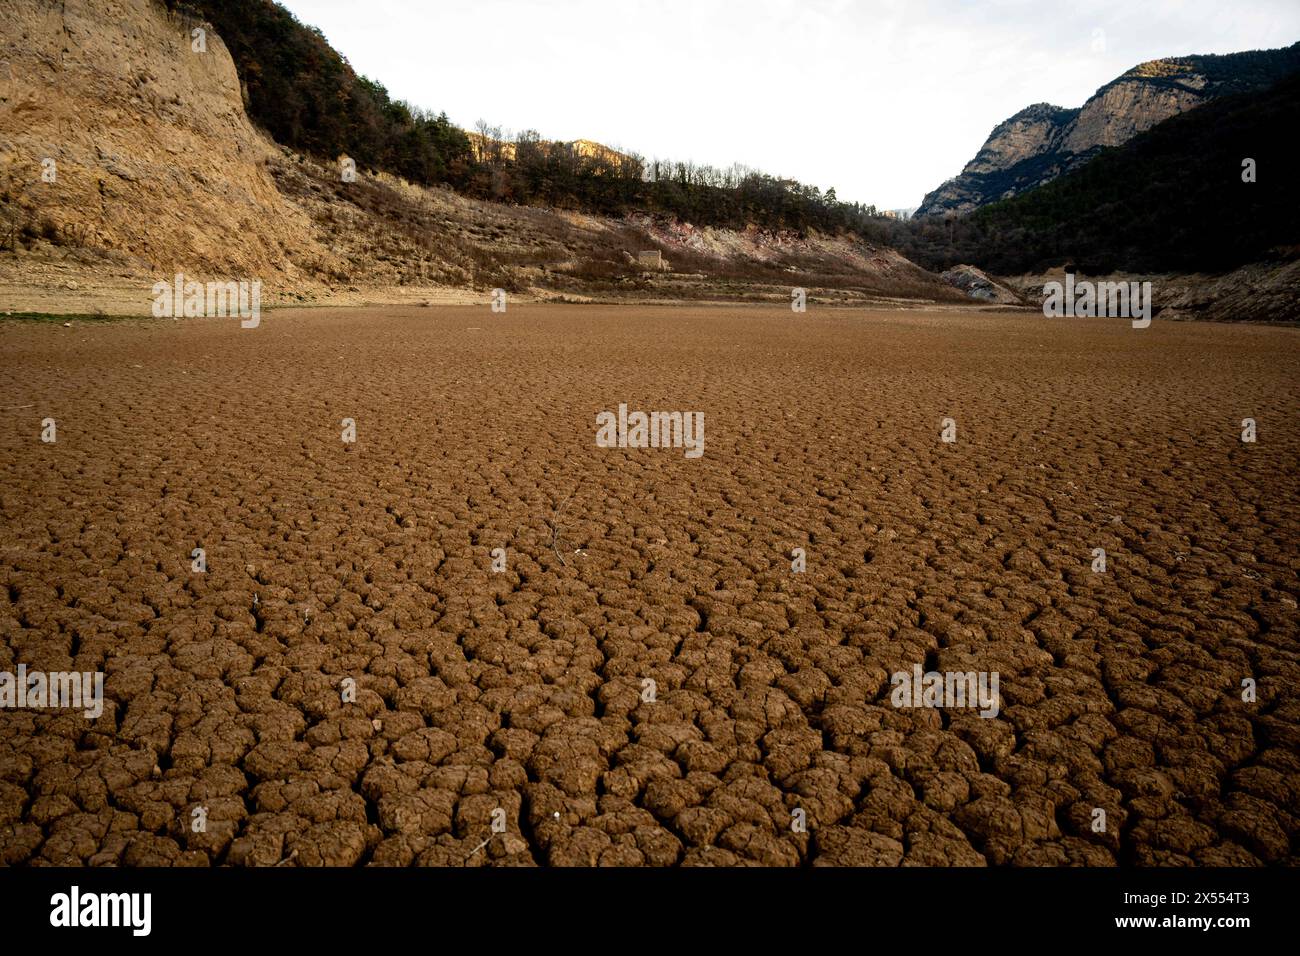 february, 01 2024 Cercs, Spain Drought  Barcelona-Baells Reservoir Drought,Llobregat river  Photo Eric Renom/LaPresse  The Baells reservoir, which is nourished by the Llobregat River, is under minimum levels the day Catalonia declares a state of emergency due to drought in the metropolitan area of Barcelona, limiting the use of water or showers in gyms. The Llobregat River, the river that feeds this reservoir, is the most industrialized river in Catalonia, as it supplies the entire industrial area around Barcelona and is therefore vital for the operation of the Catalan industry, from the car b Stock Photo